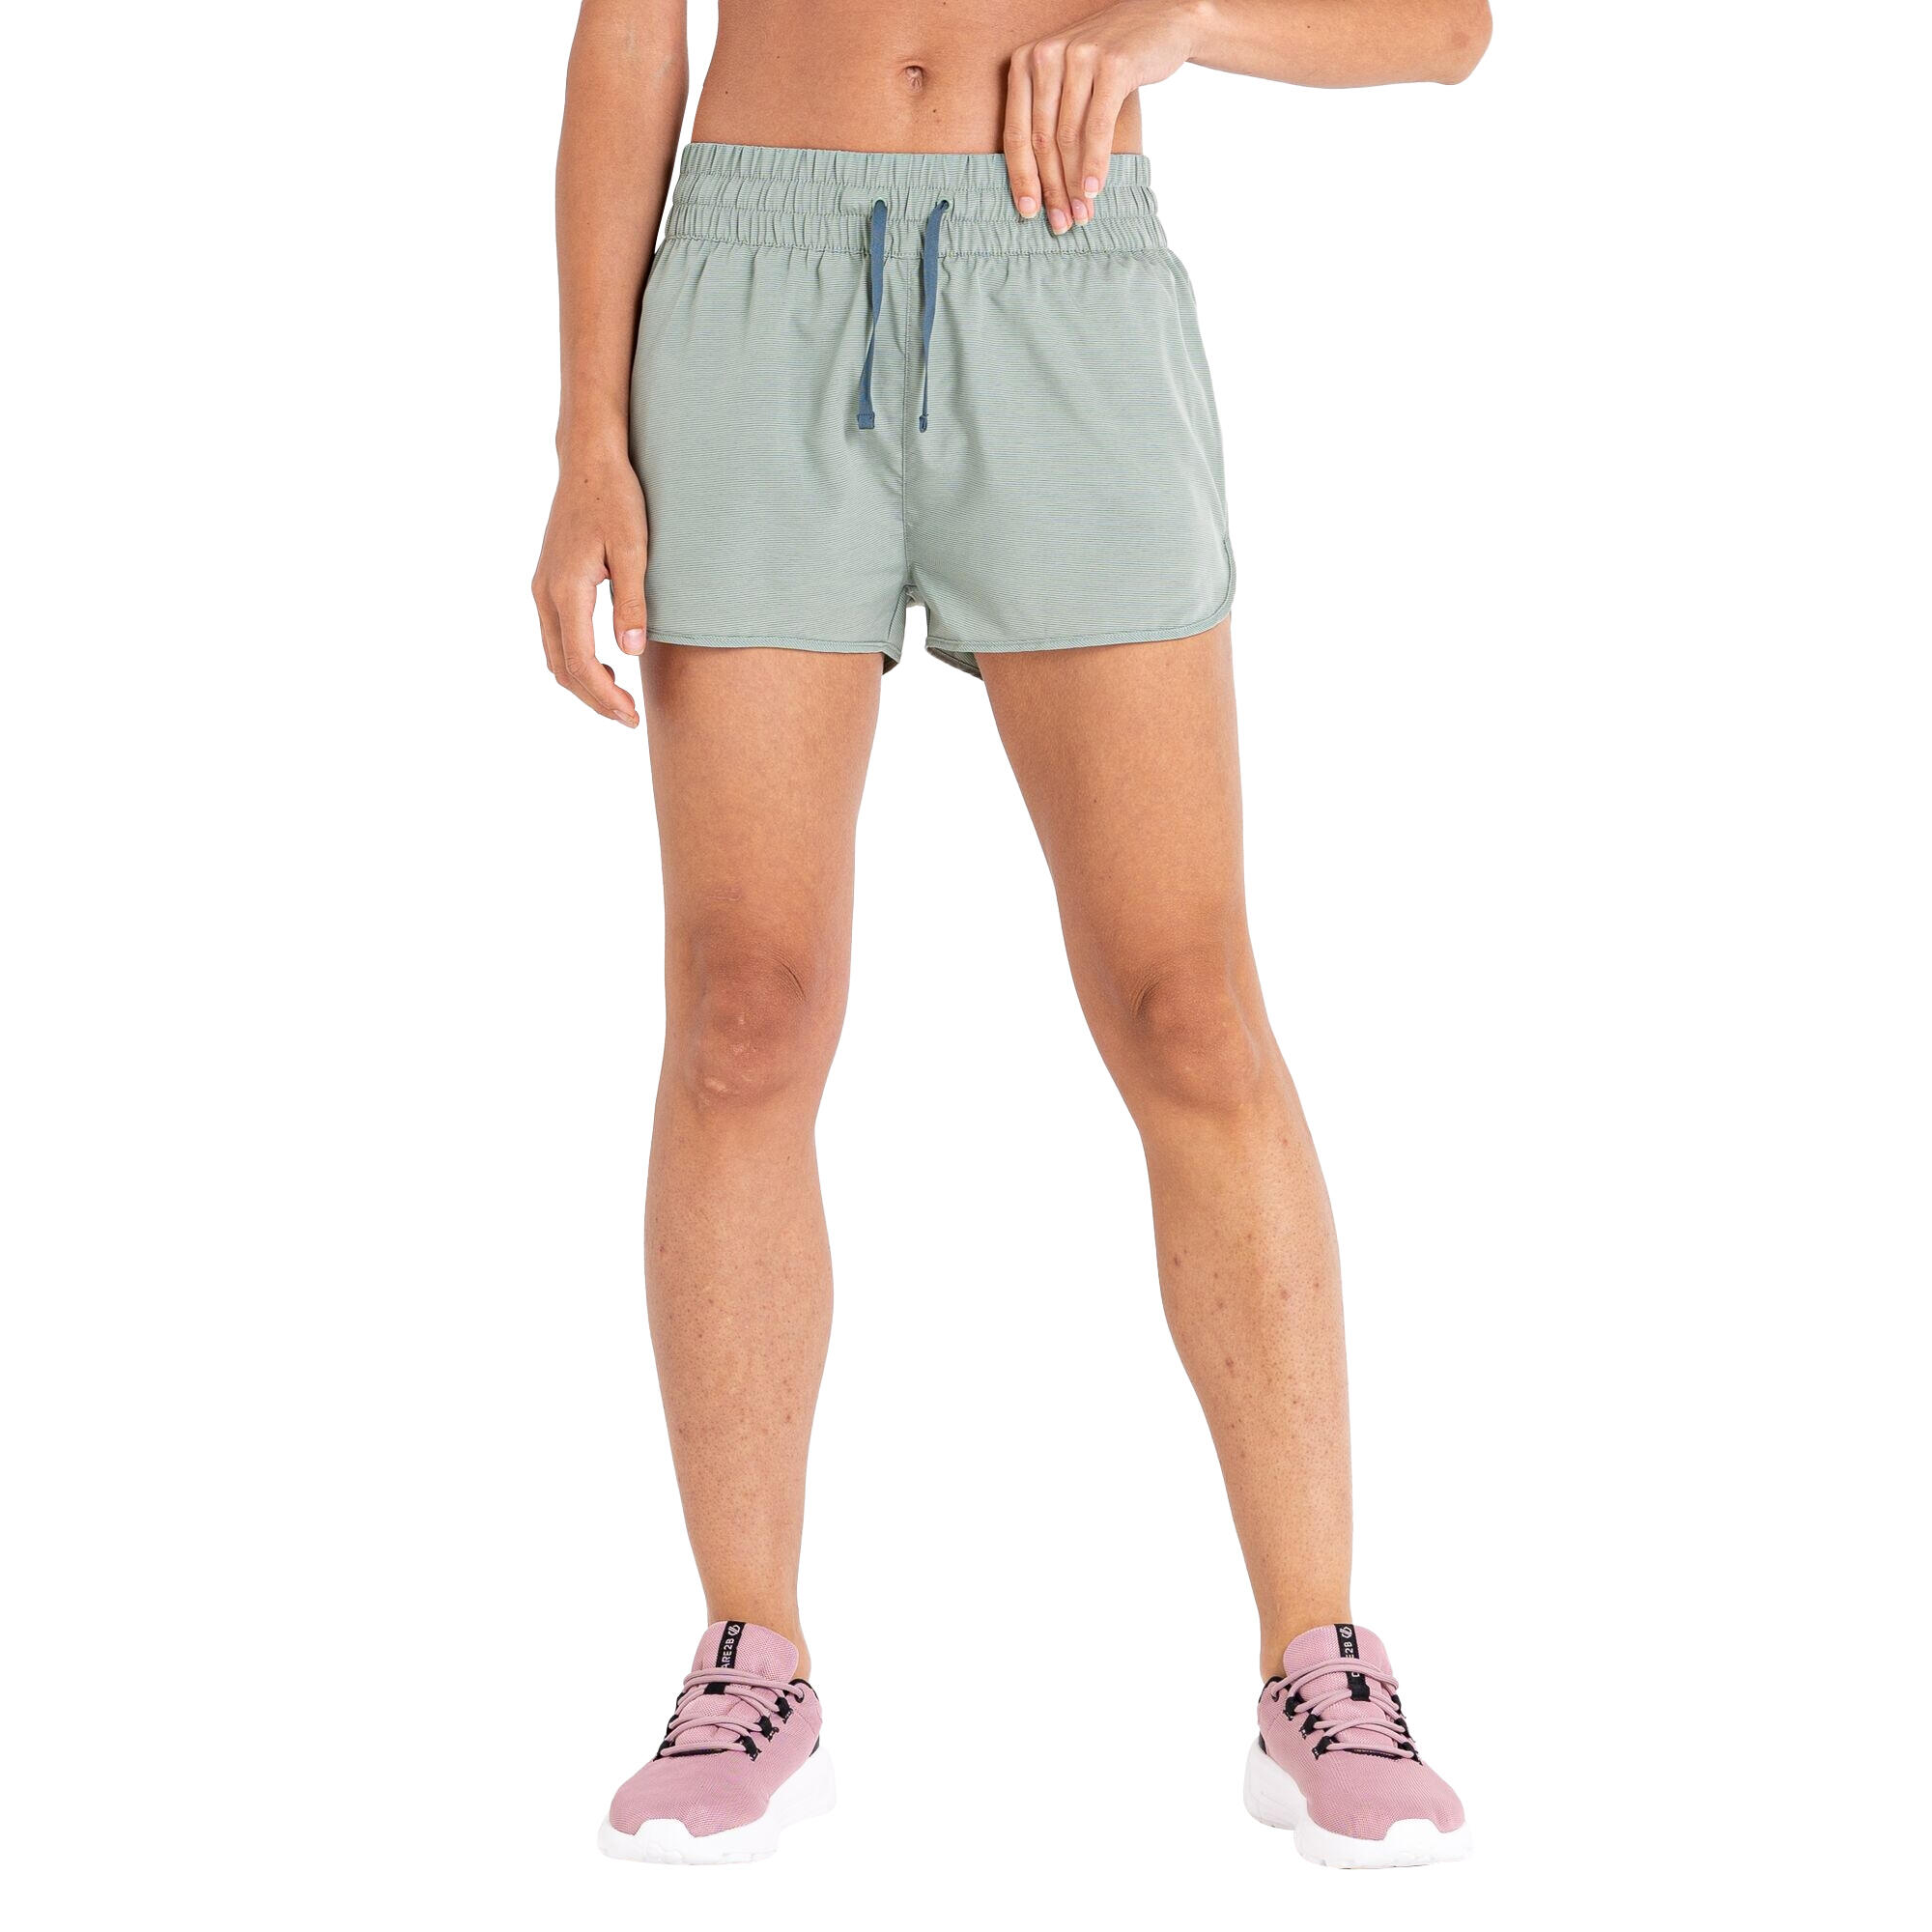 Womens/Ladies Sprint Up 2 in 1 Shorts (Lilypad Green) 4/5